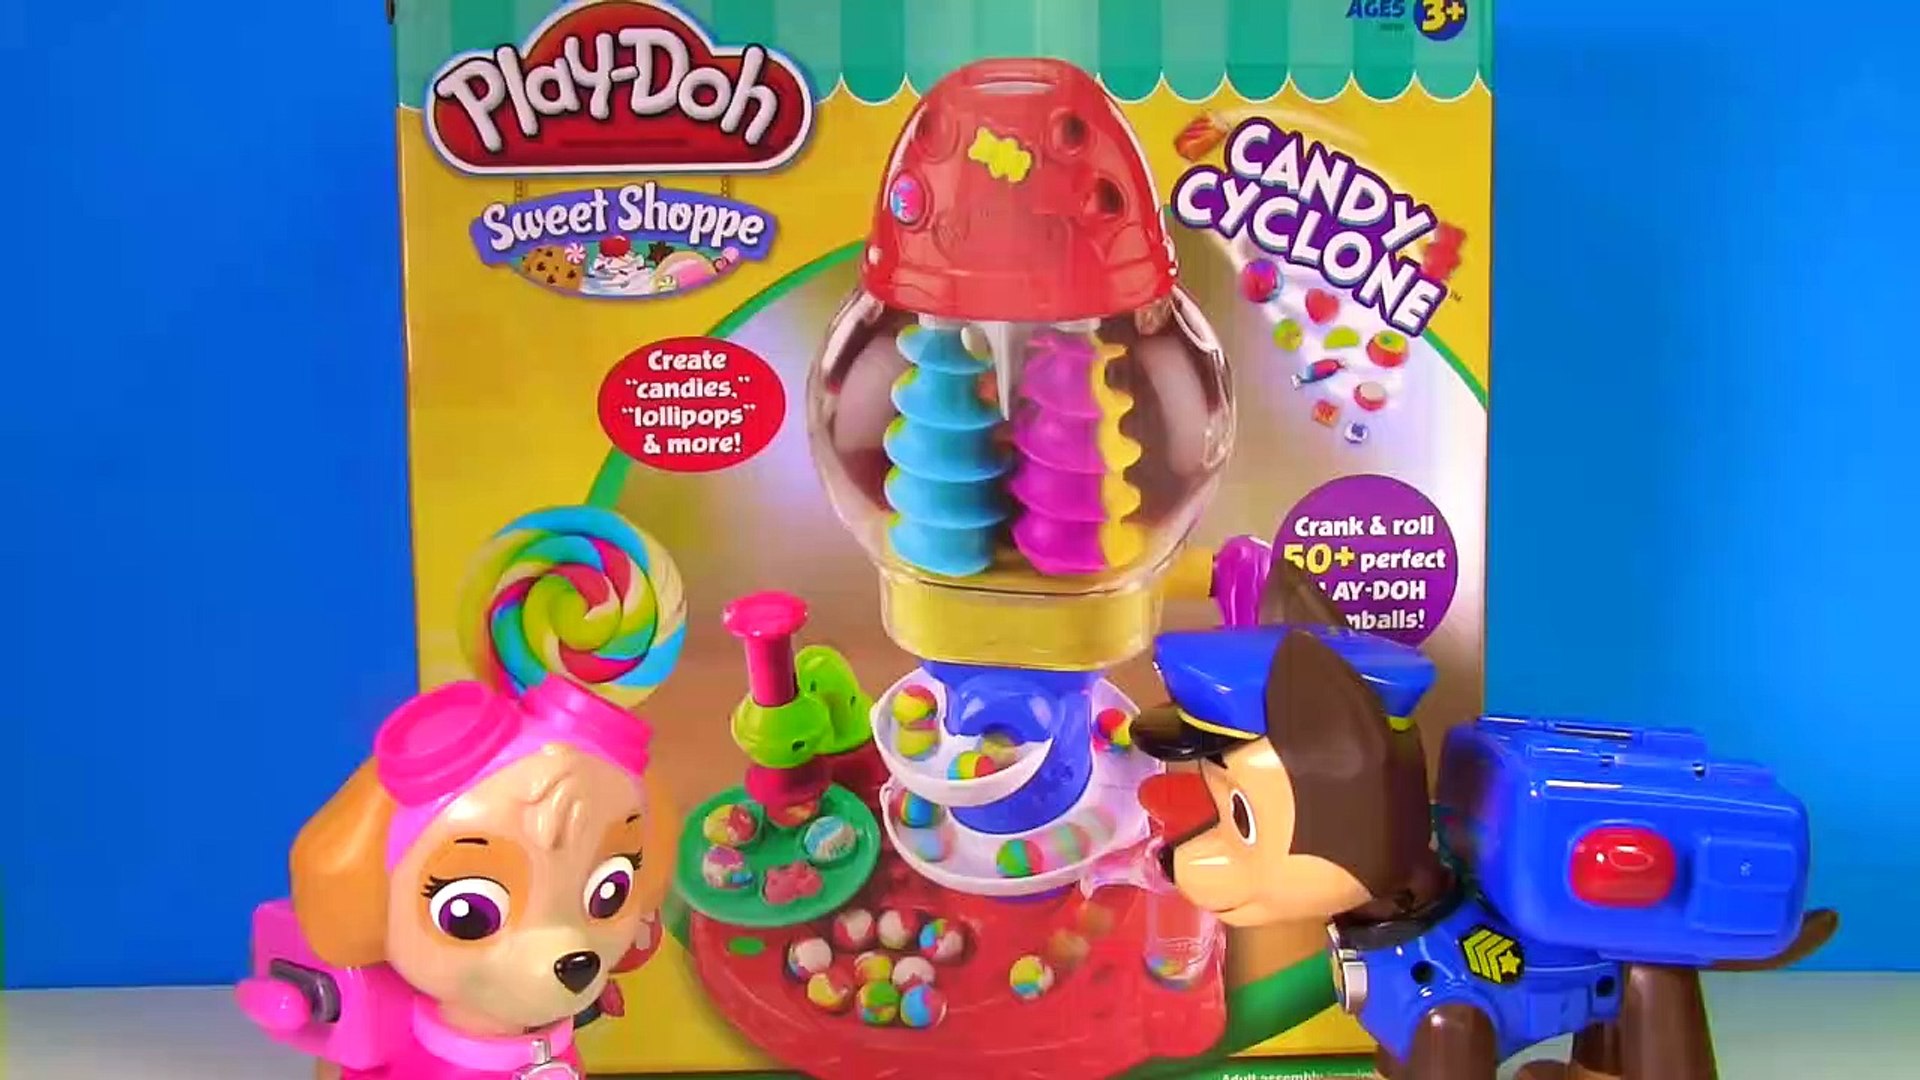 Paw Doh Gumball and Lollipop Maker Dailymotion